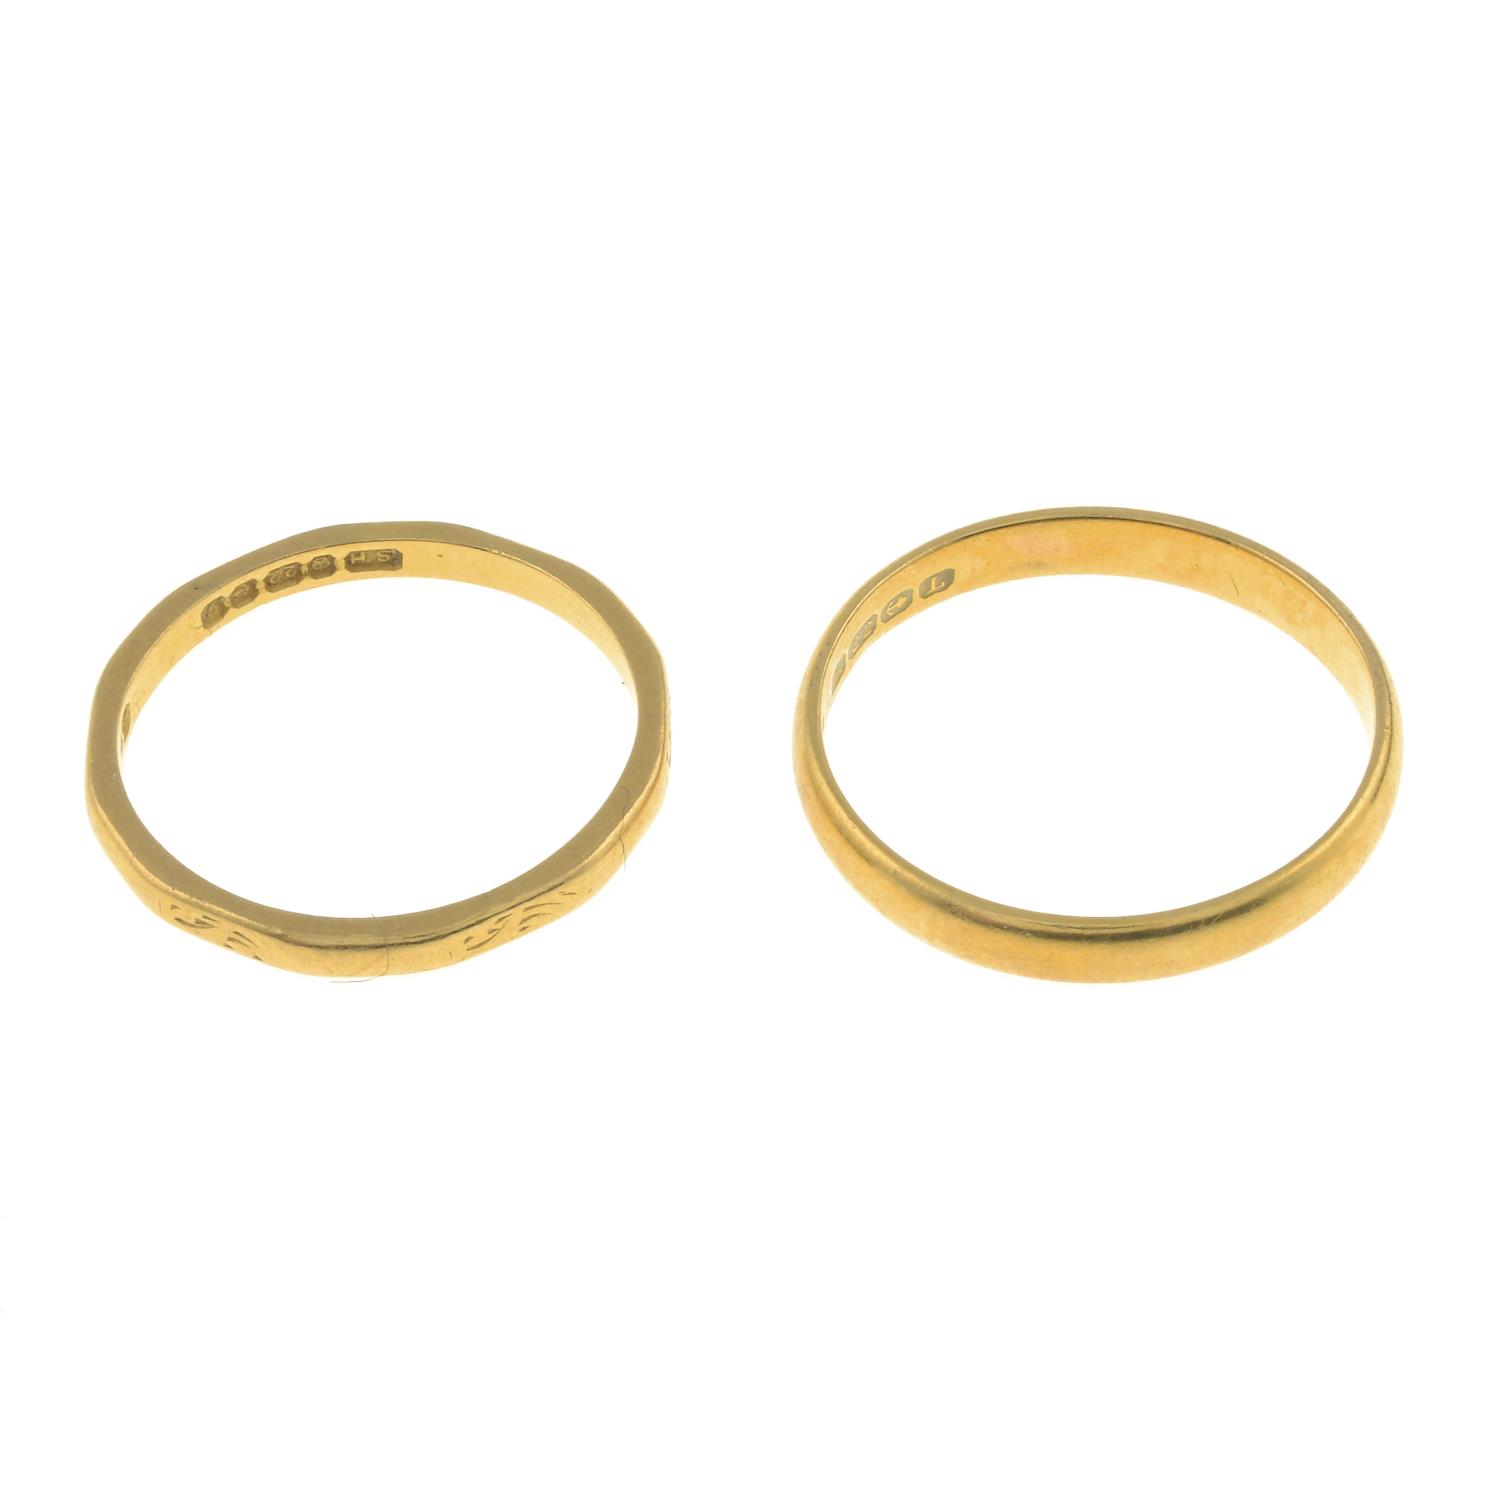 Two 22ct gold band rings.Hallmarks for Birmingham, 1935 and 1956.